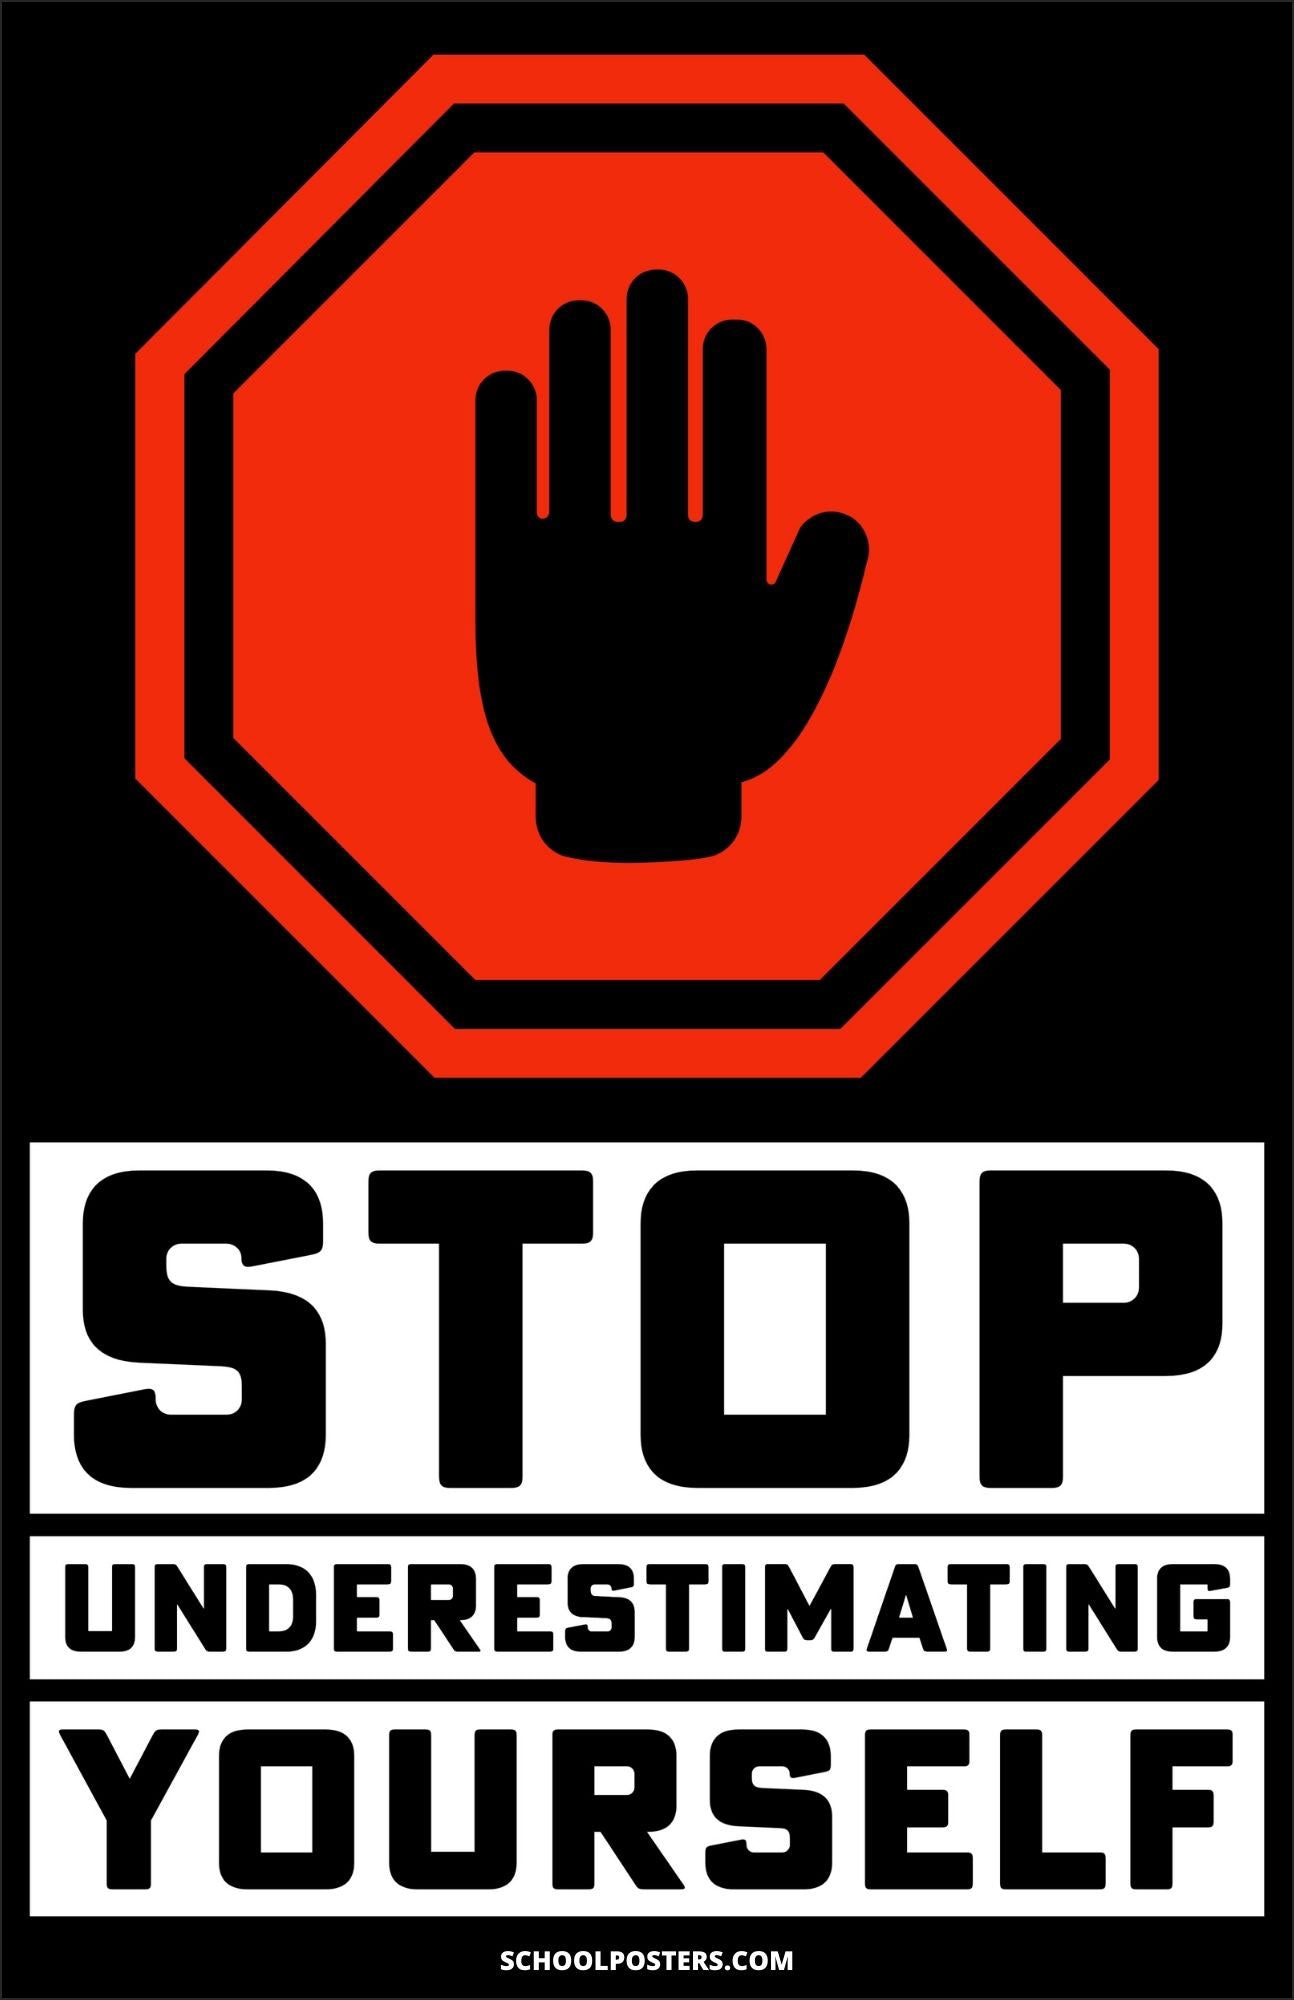 Stop Underestimating Yourself Poster